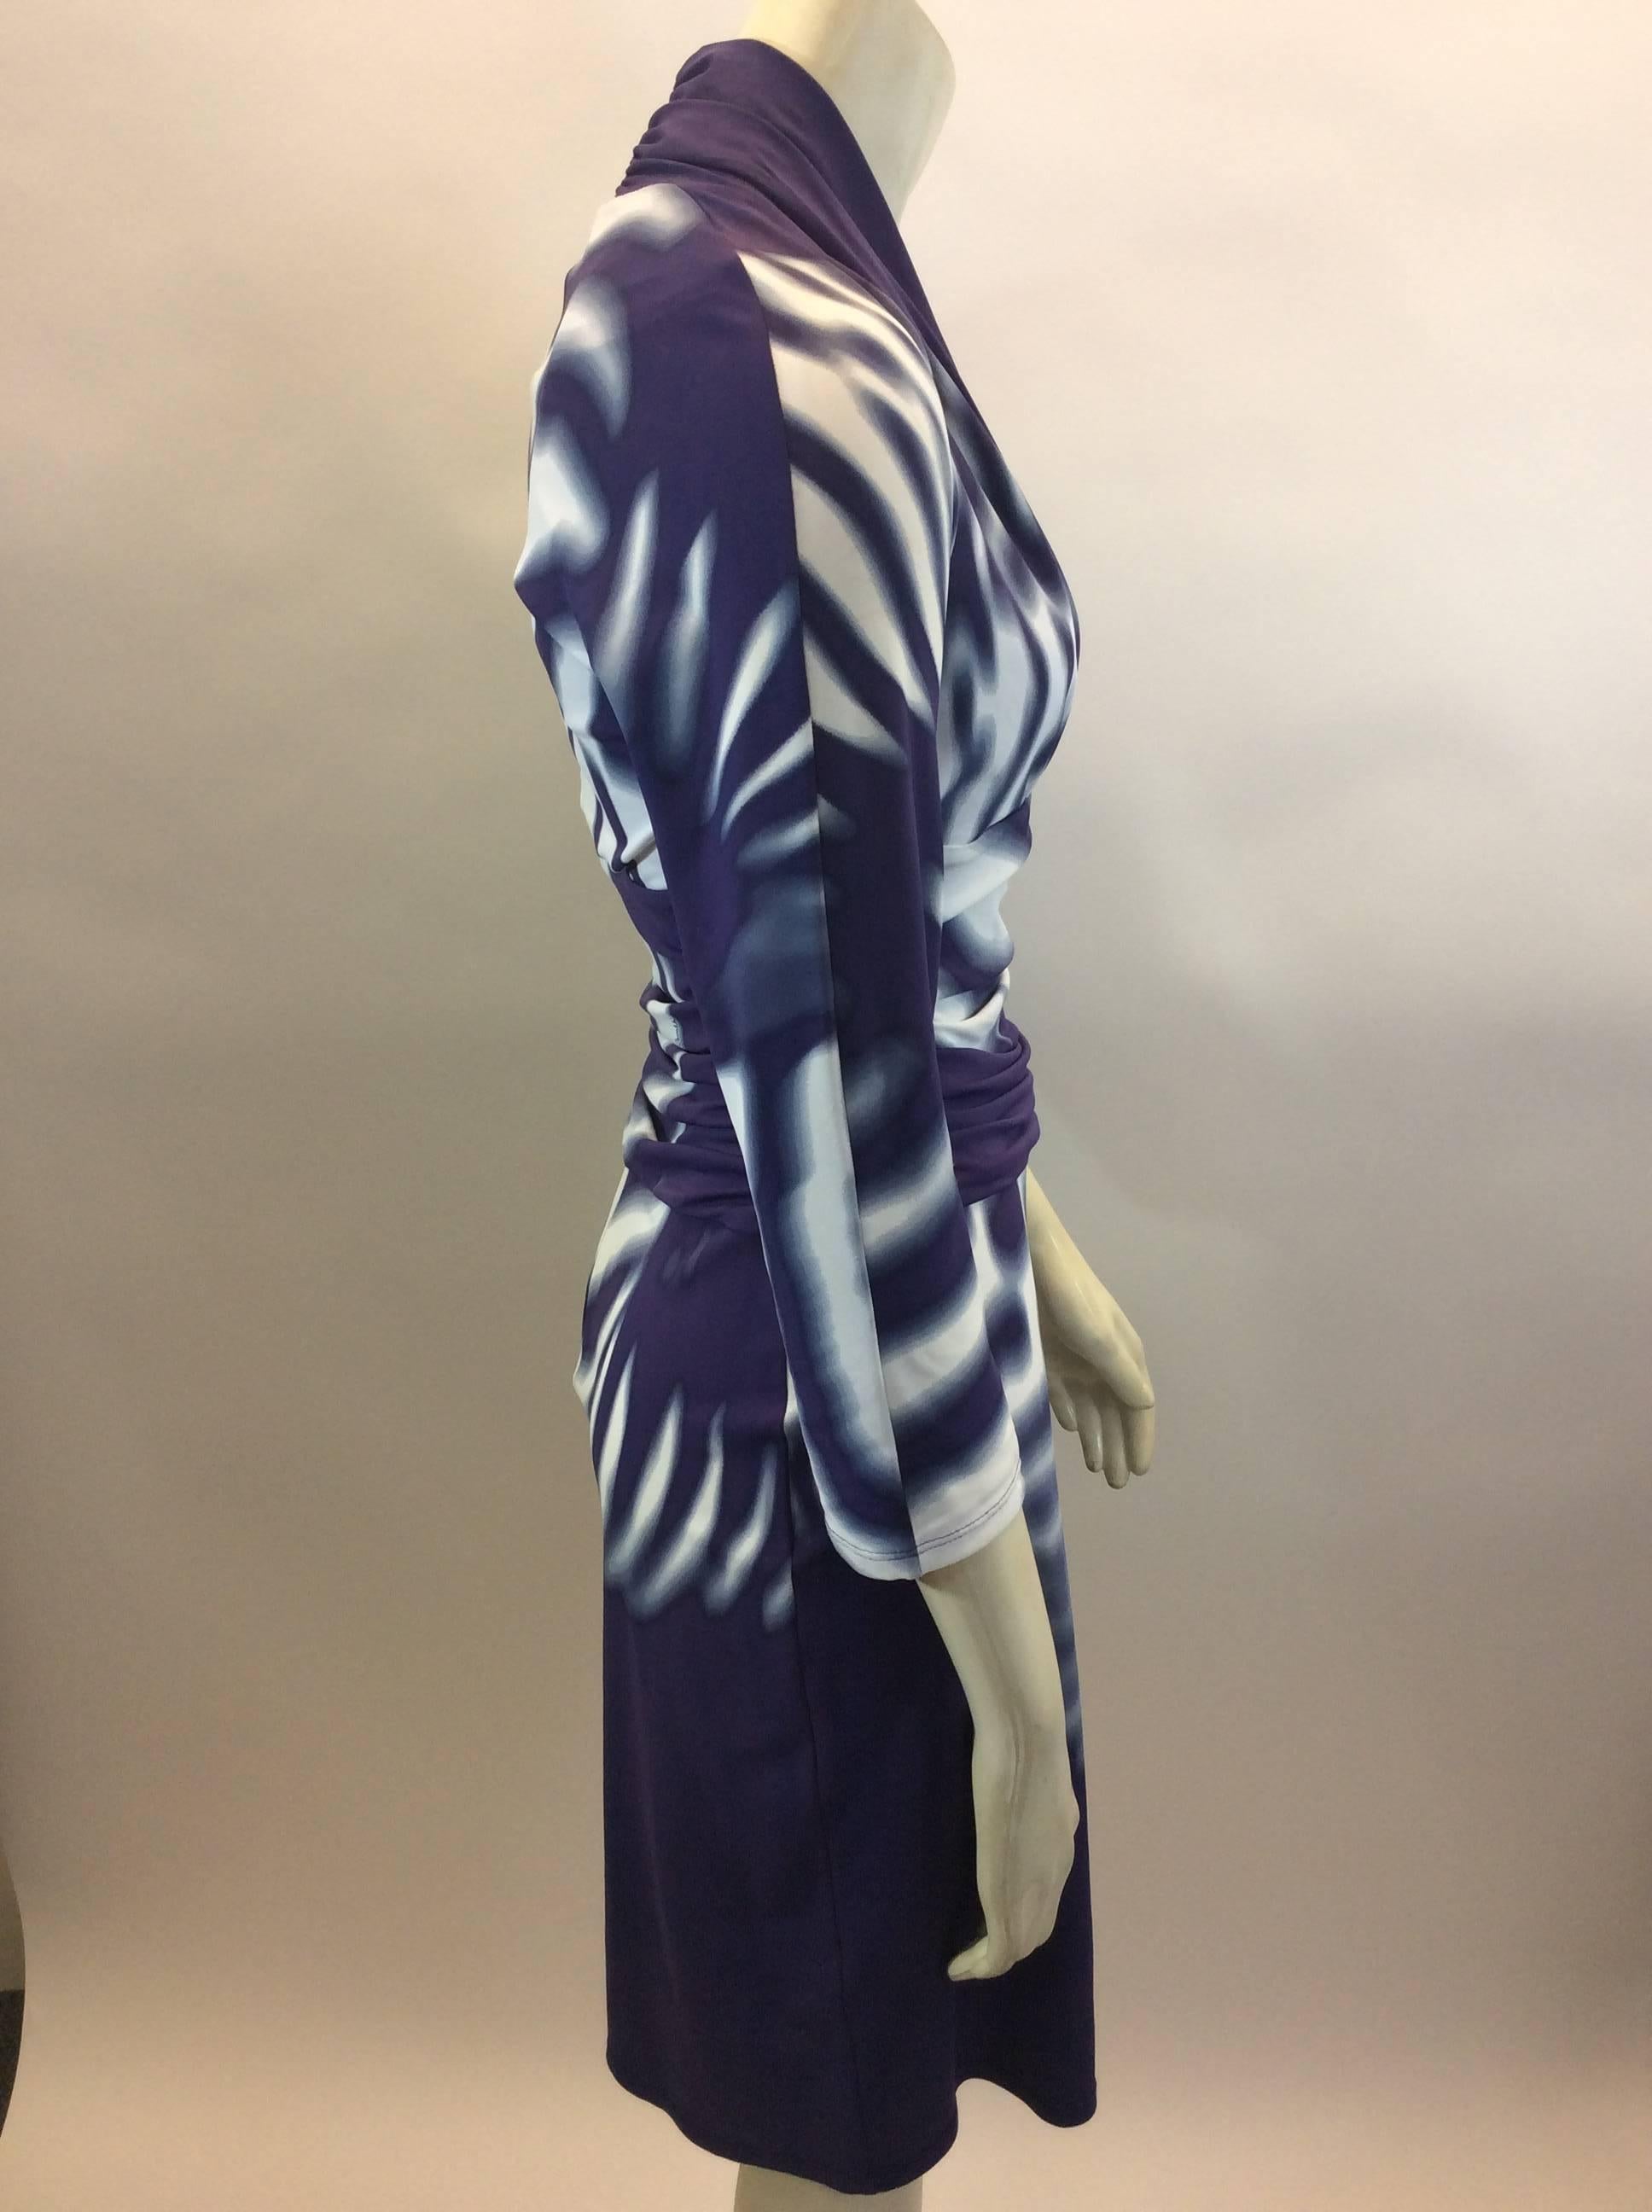 Roberto Cavalli Purple Print Dress In Excellent Condition For Sale In Narberth, PA